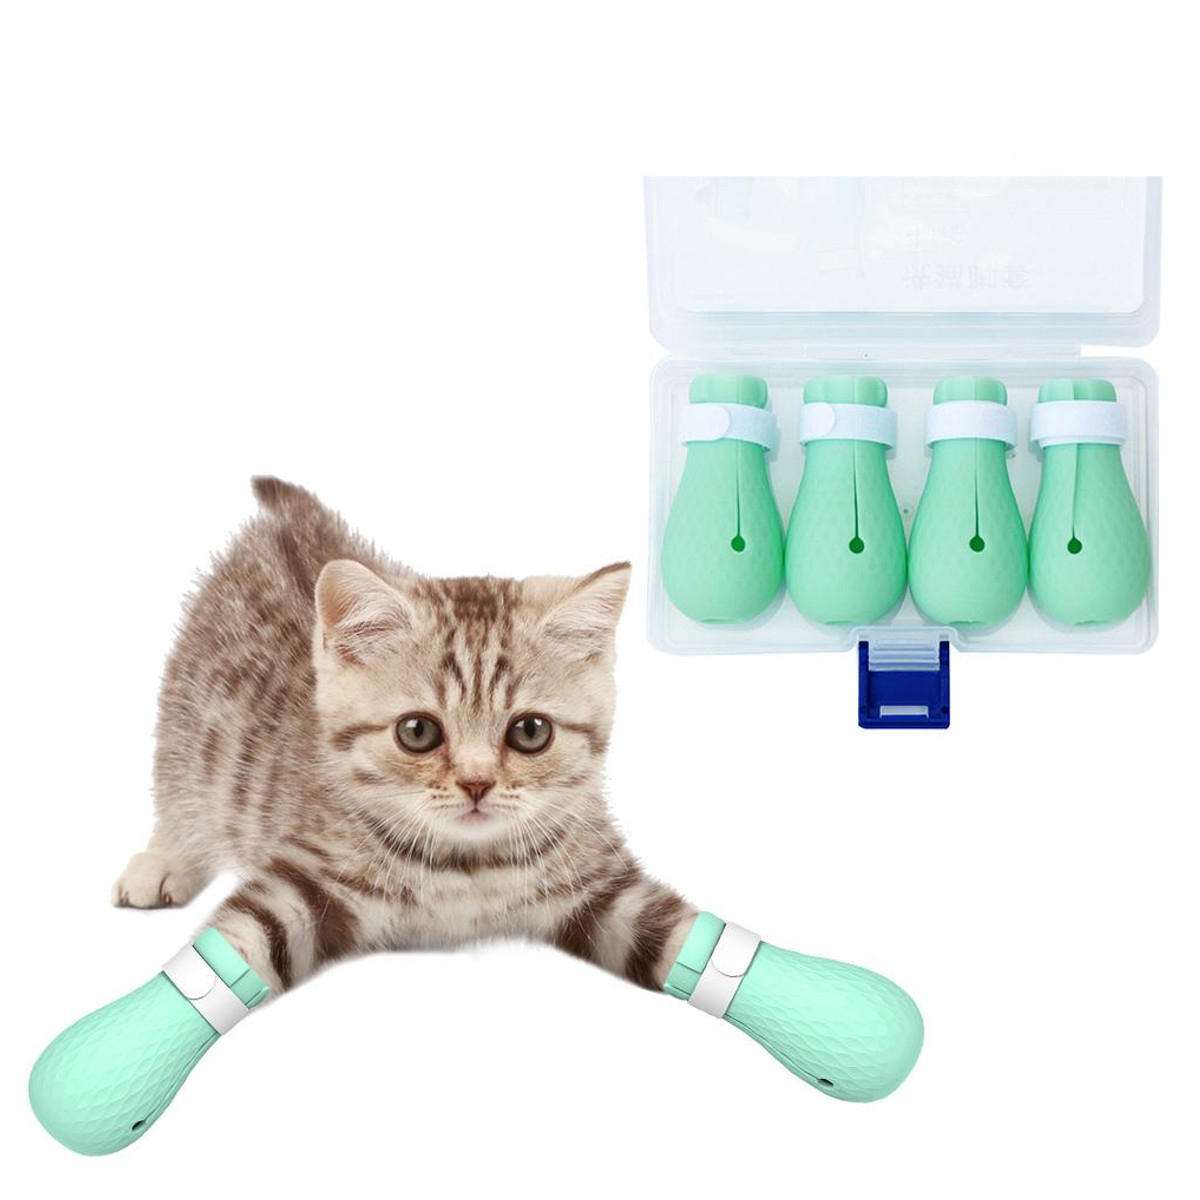 4pcs/set antiscratch cat foot shoes silicone pet grooming claws cover